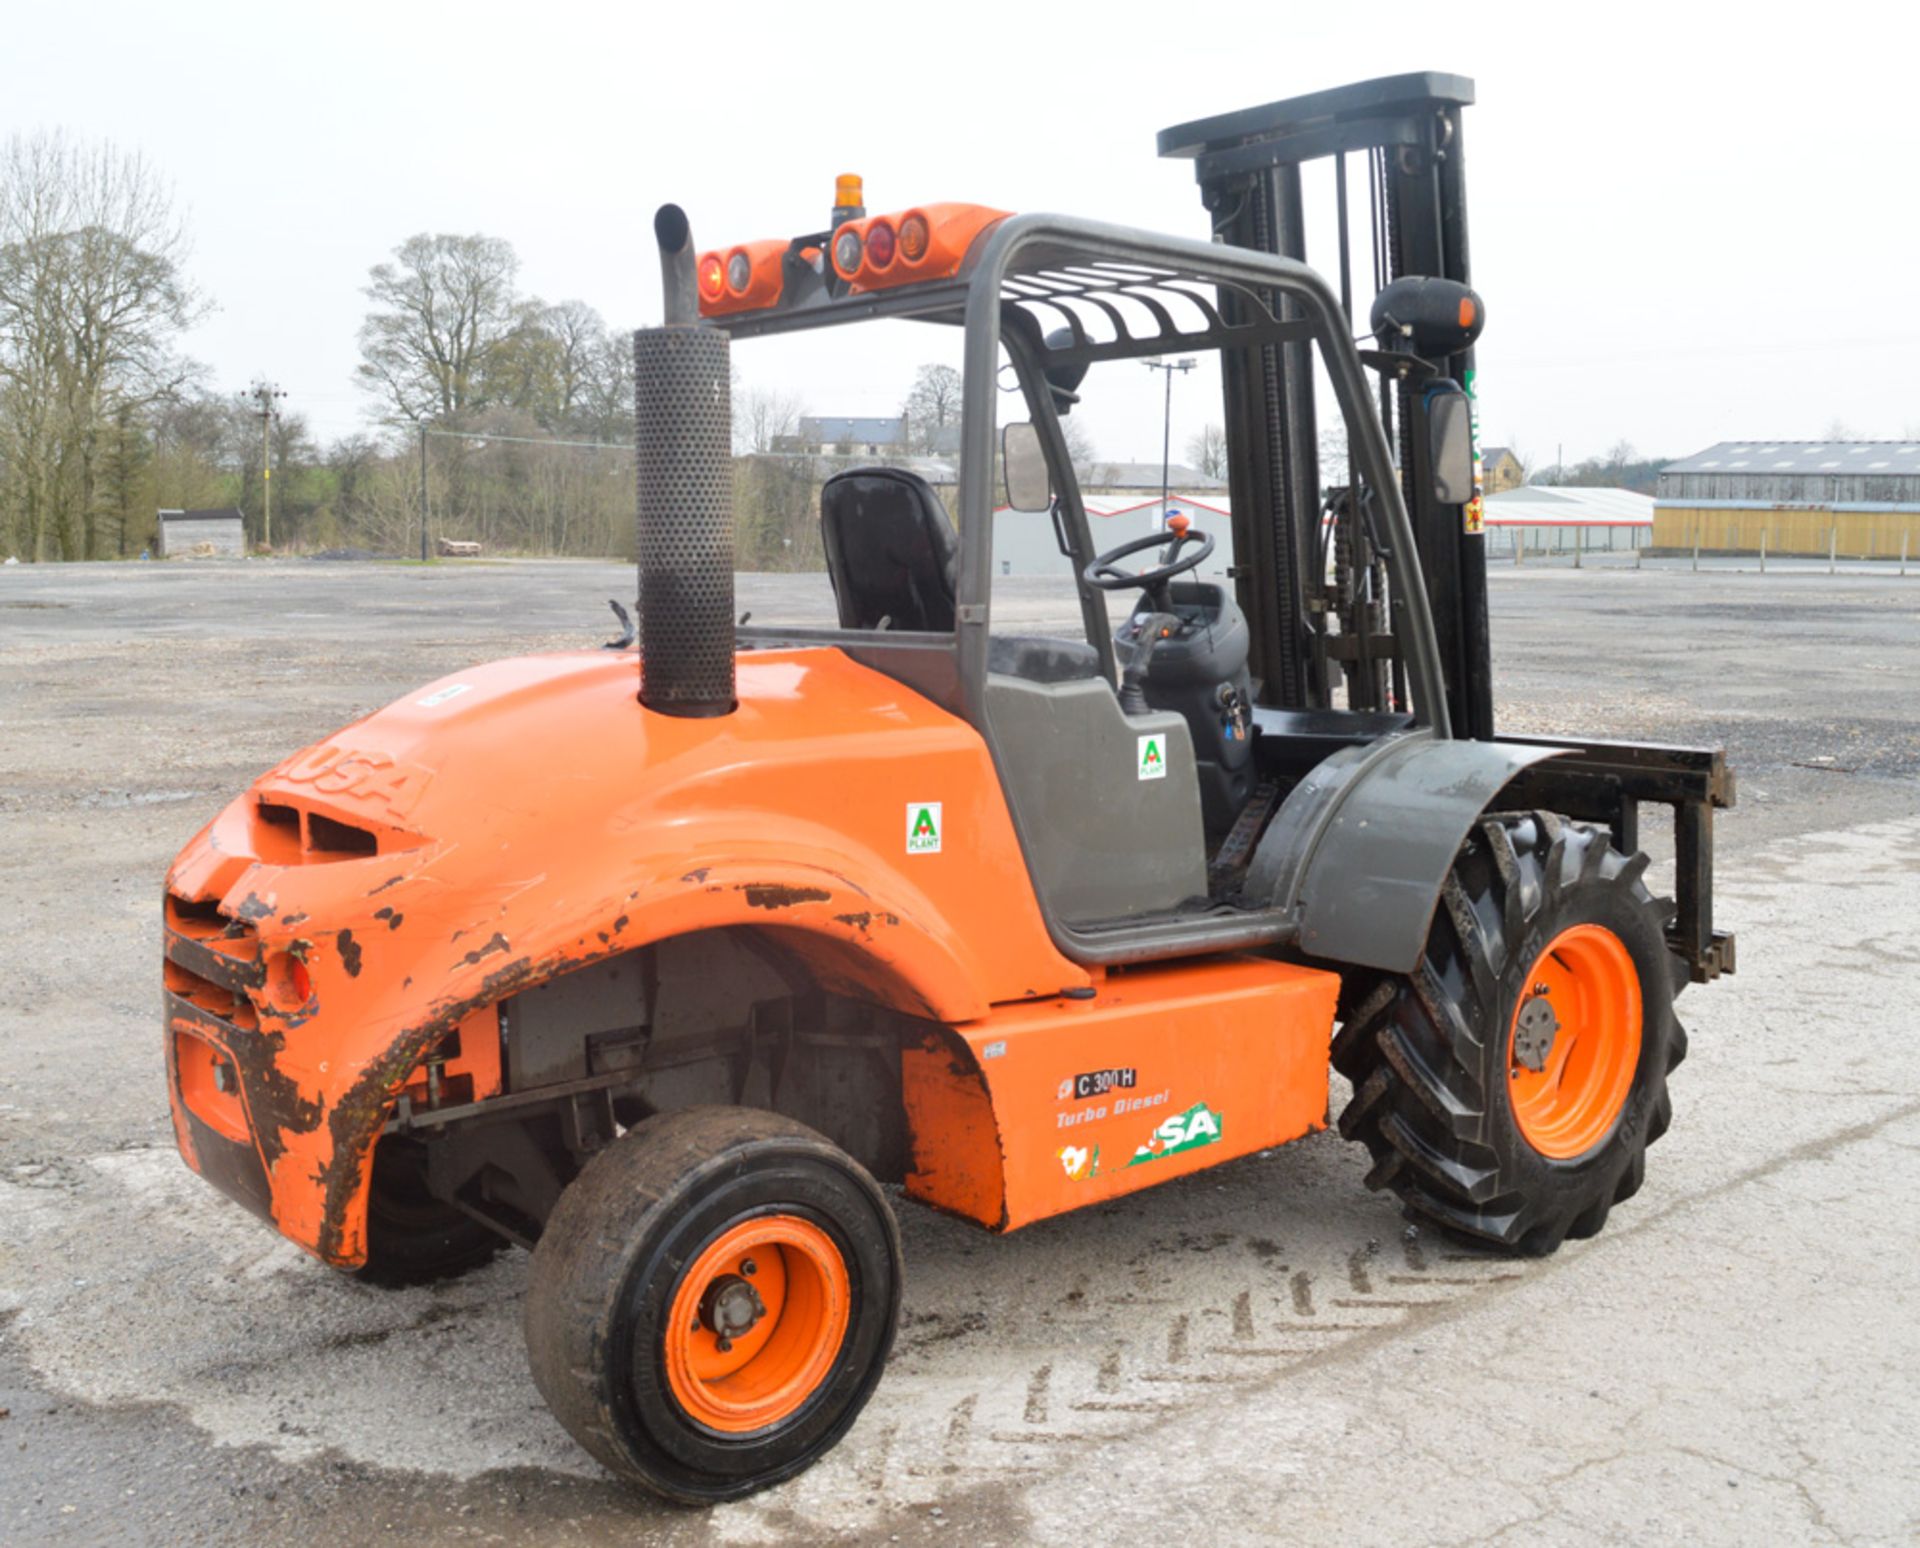 Ausa C300H 3 tonne diesel driven fork lift truck Year: 2007 S/N: 57055614 Recorded Hours: 2805 - Image 3 of 12